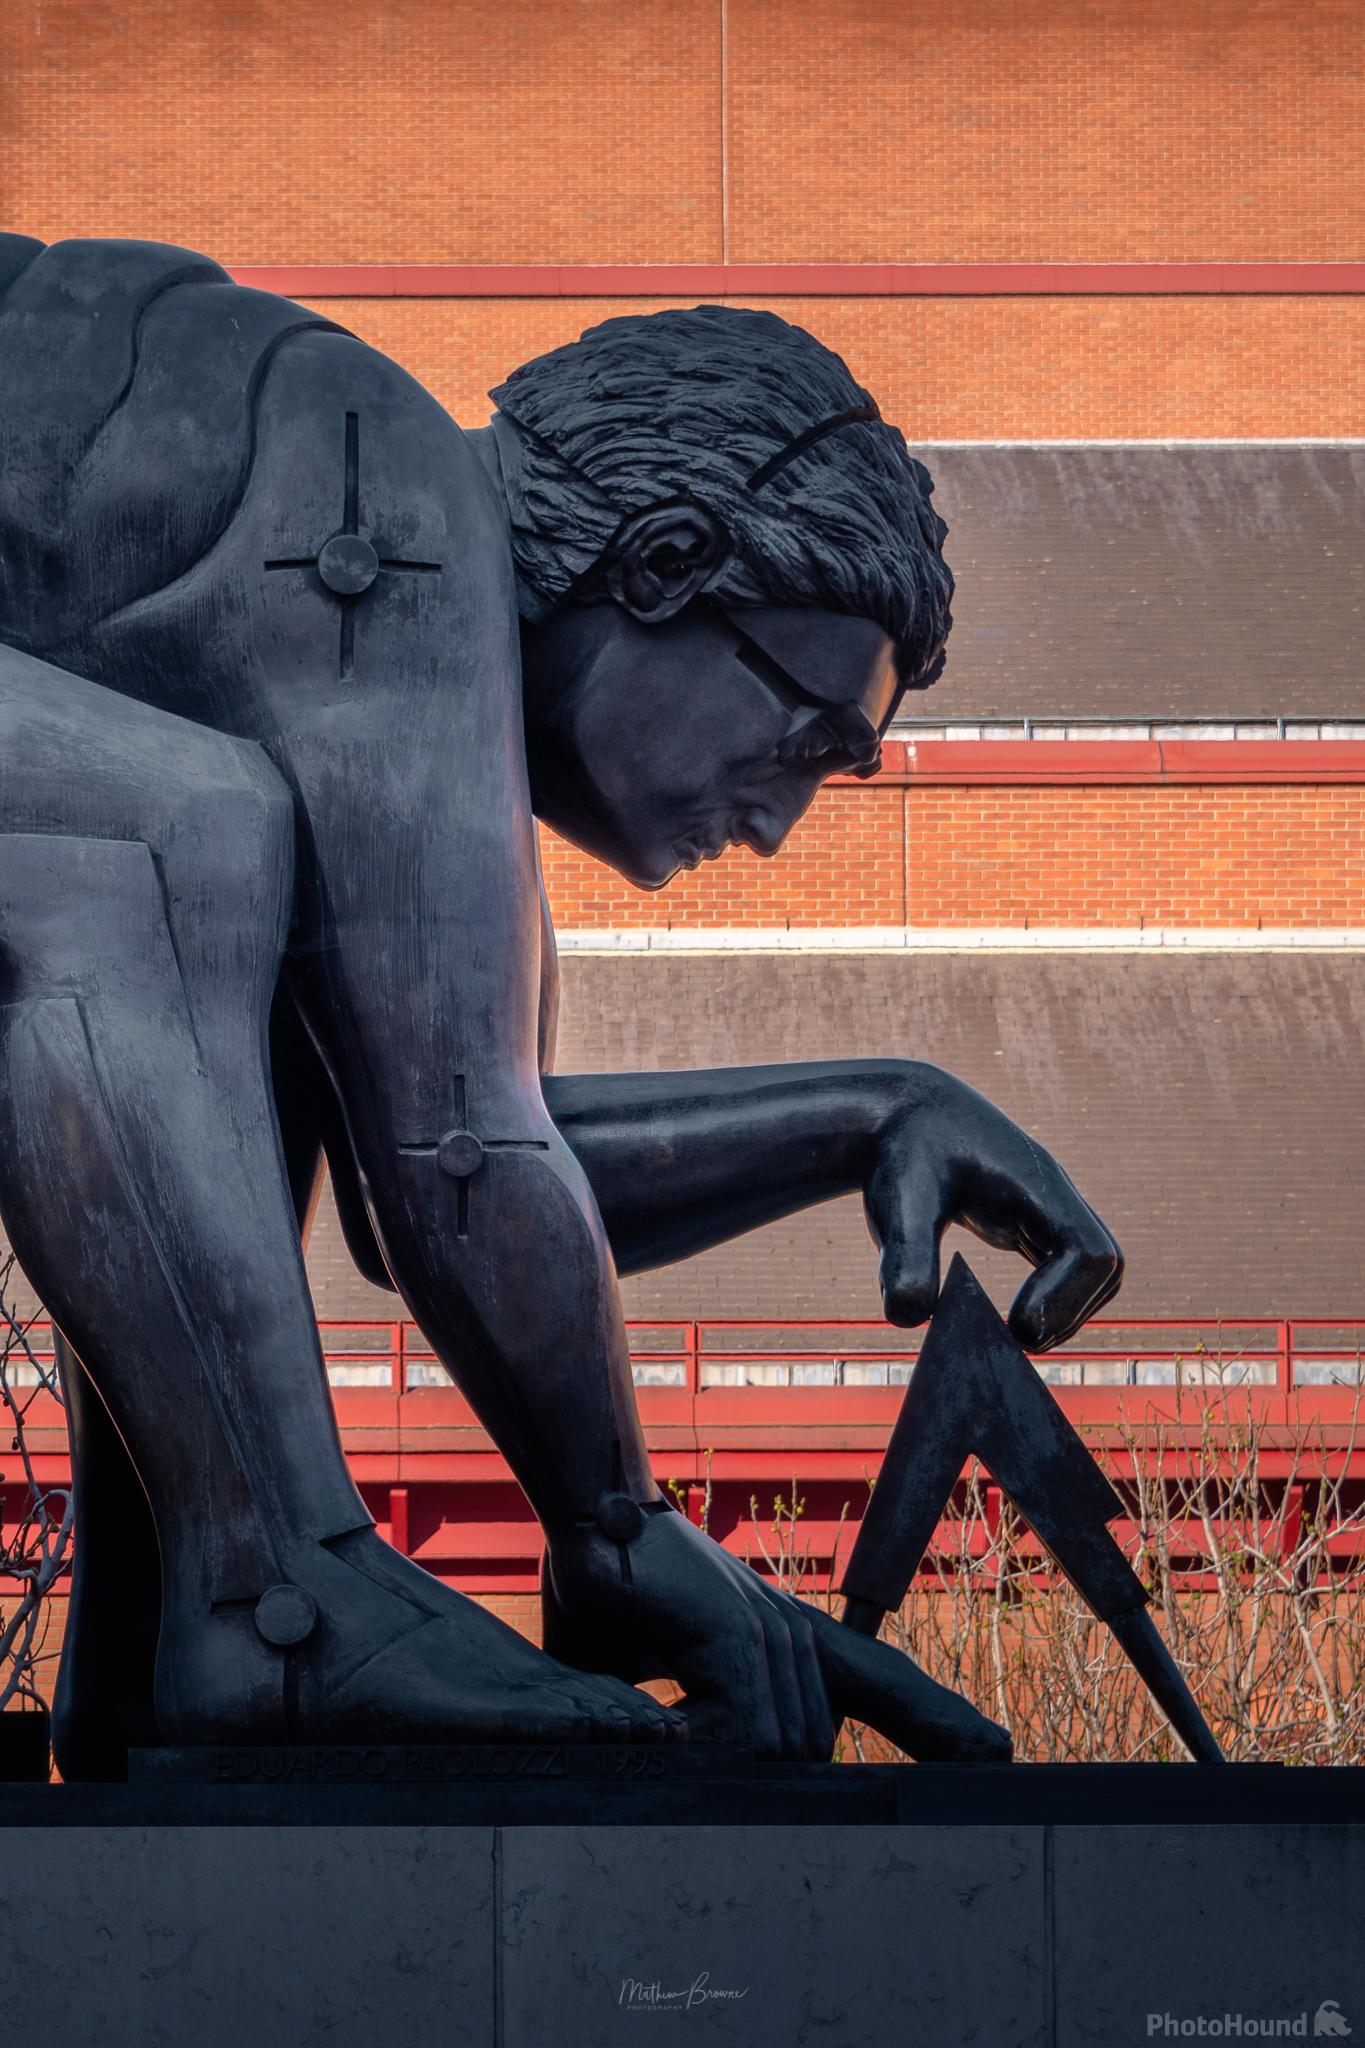 Image of The British Library by Mathew Browne